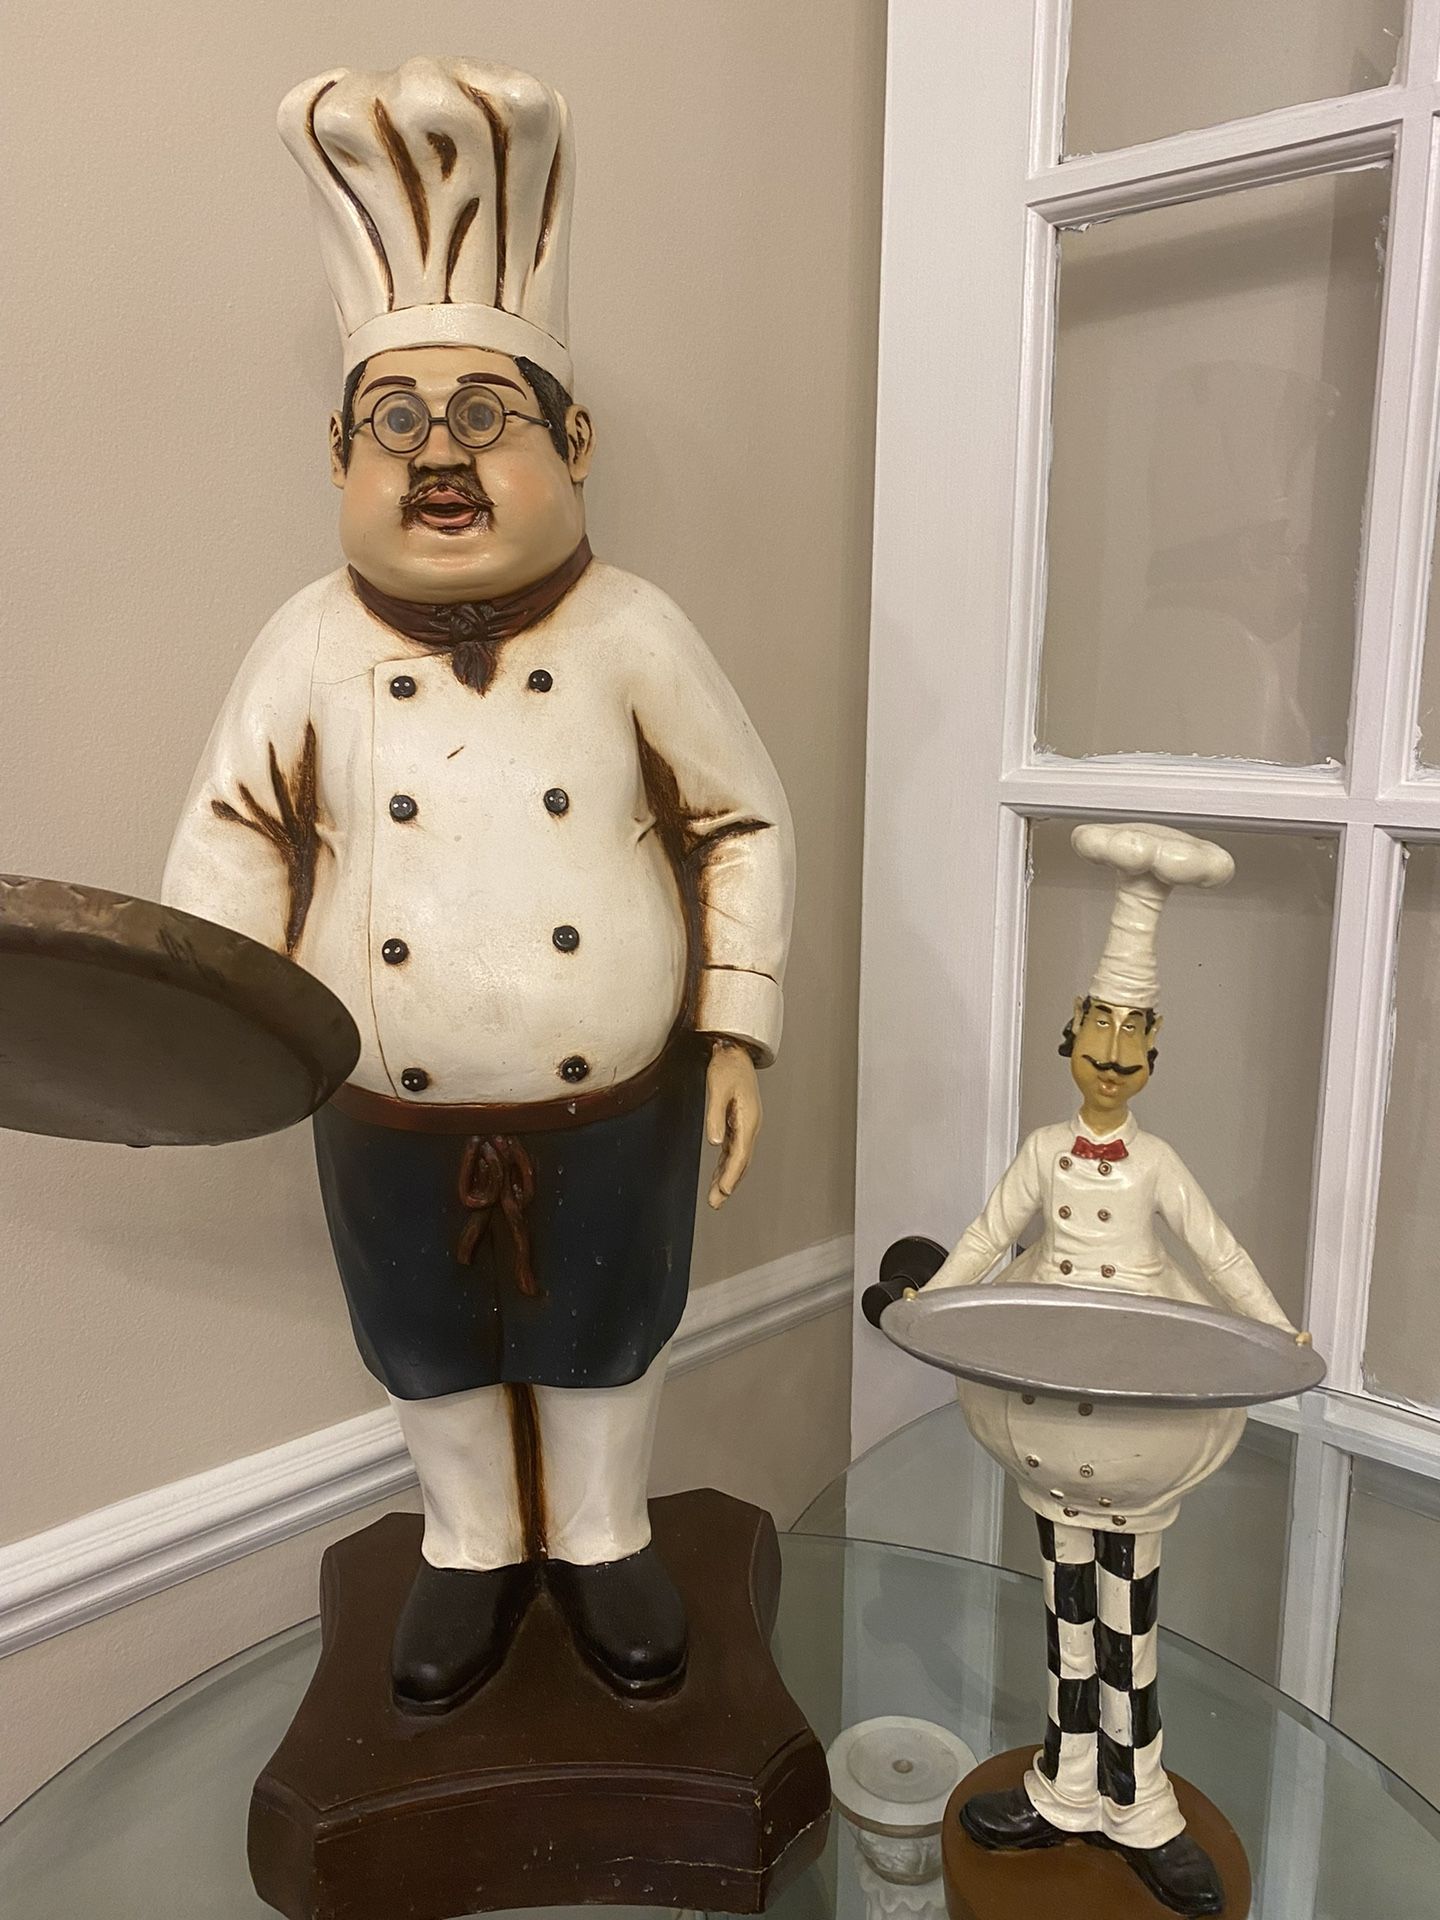 Very Nice kitchen decoration Statue for both